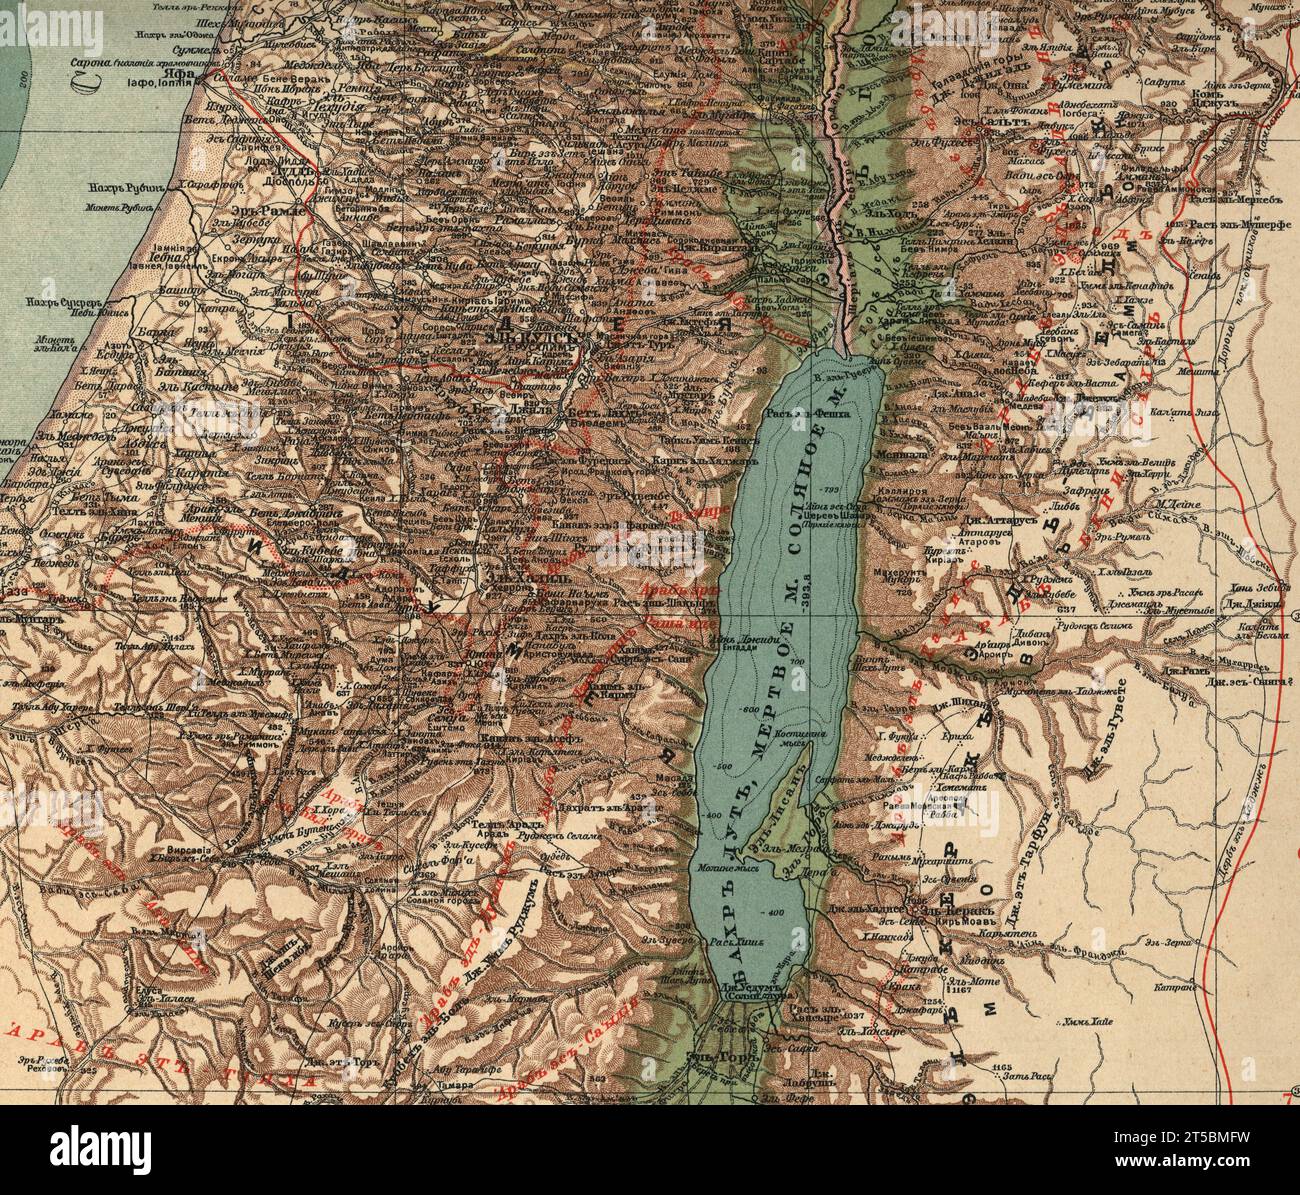 A detailed vintage map of part of Palestine. Dead Sea, Jerusalem. Areas, names of cities and settlements, including in Arabic (red), 1910 General geographical (physical) map Stock Photo